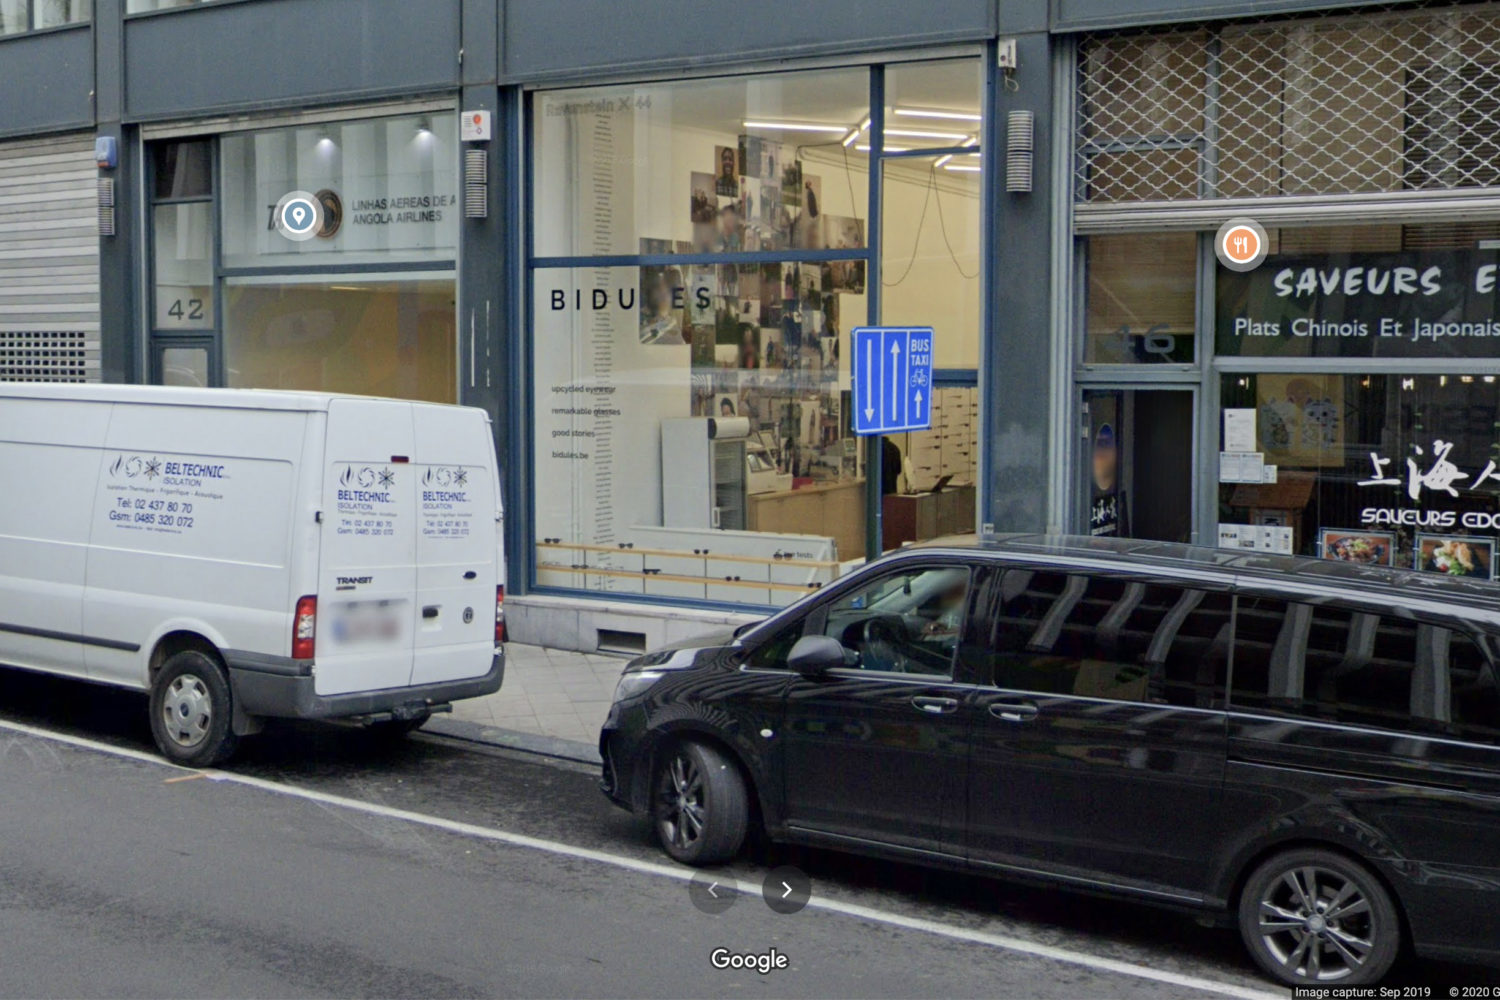 A view from Bidules glasses store Rue Ravenstein Bruxelles on Google Maps back in 2020